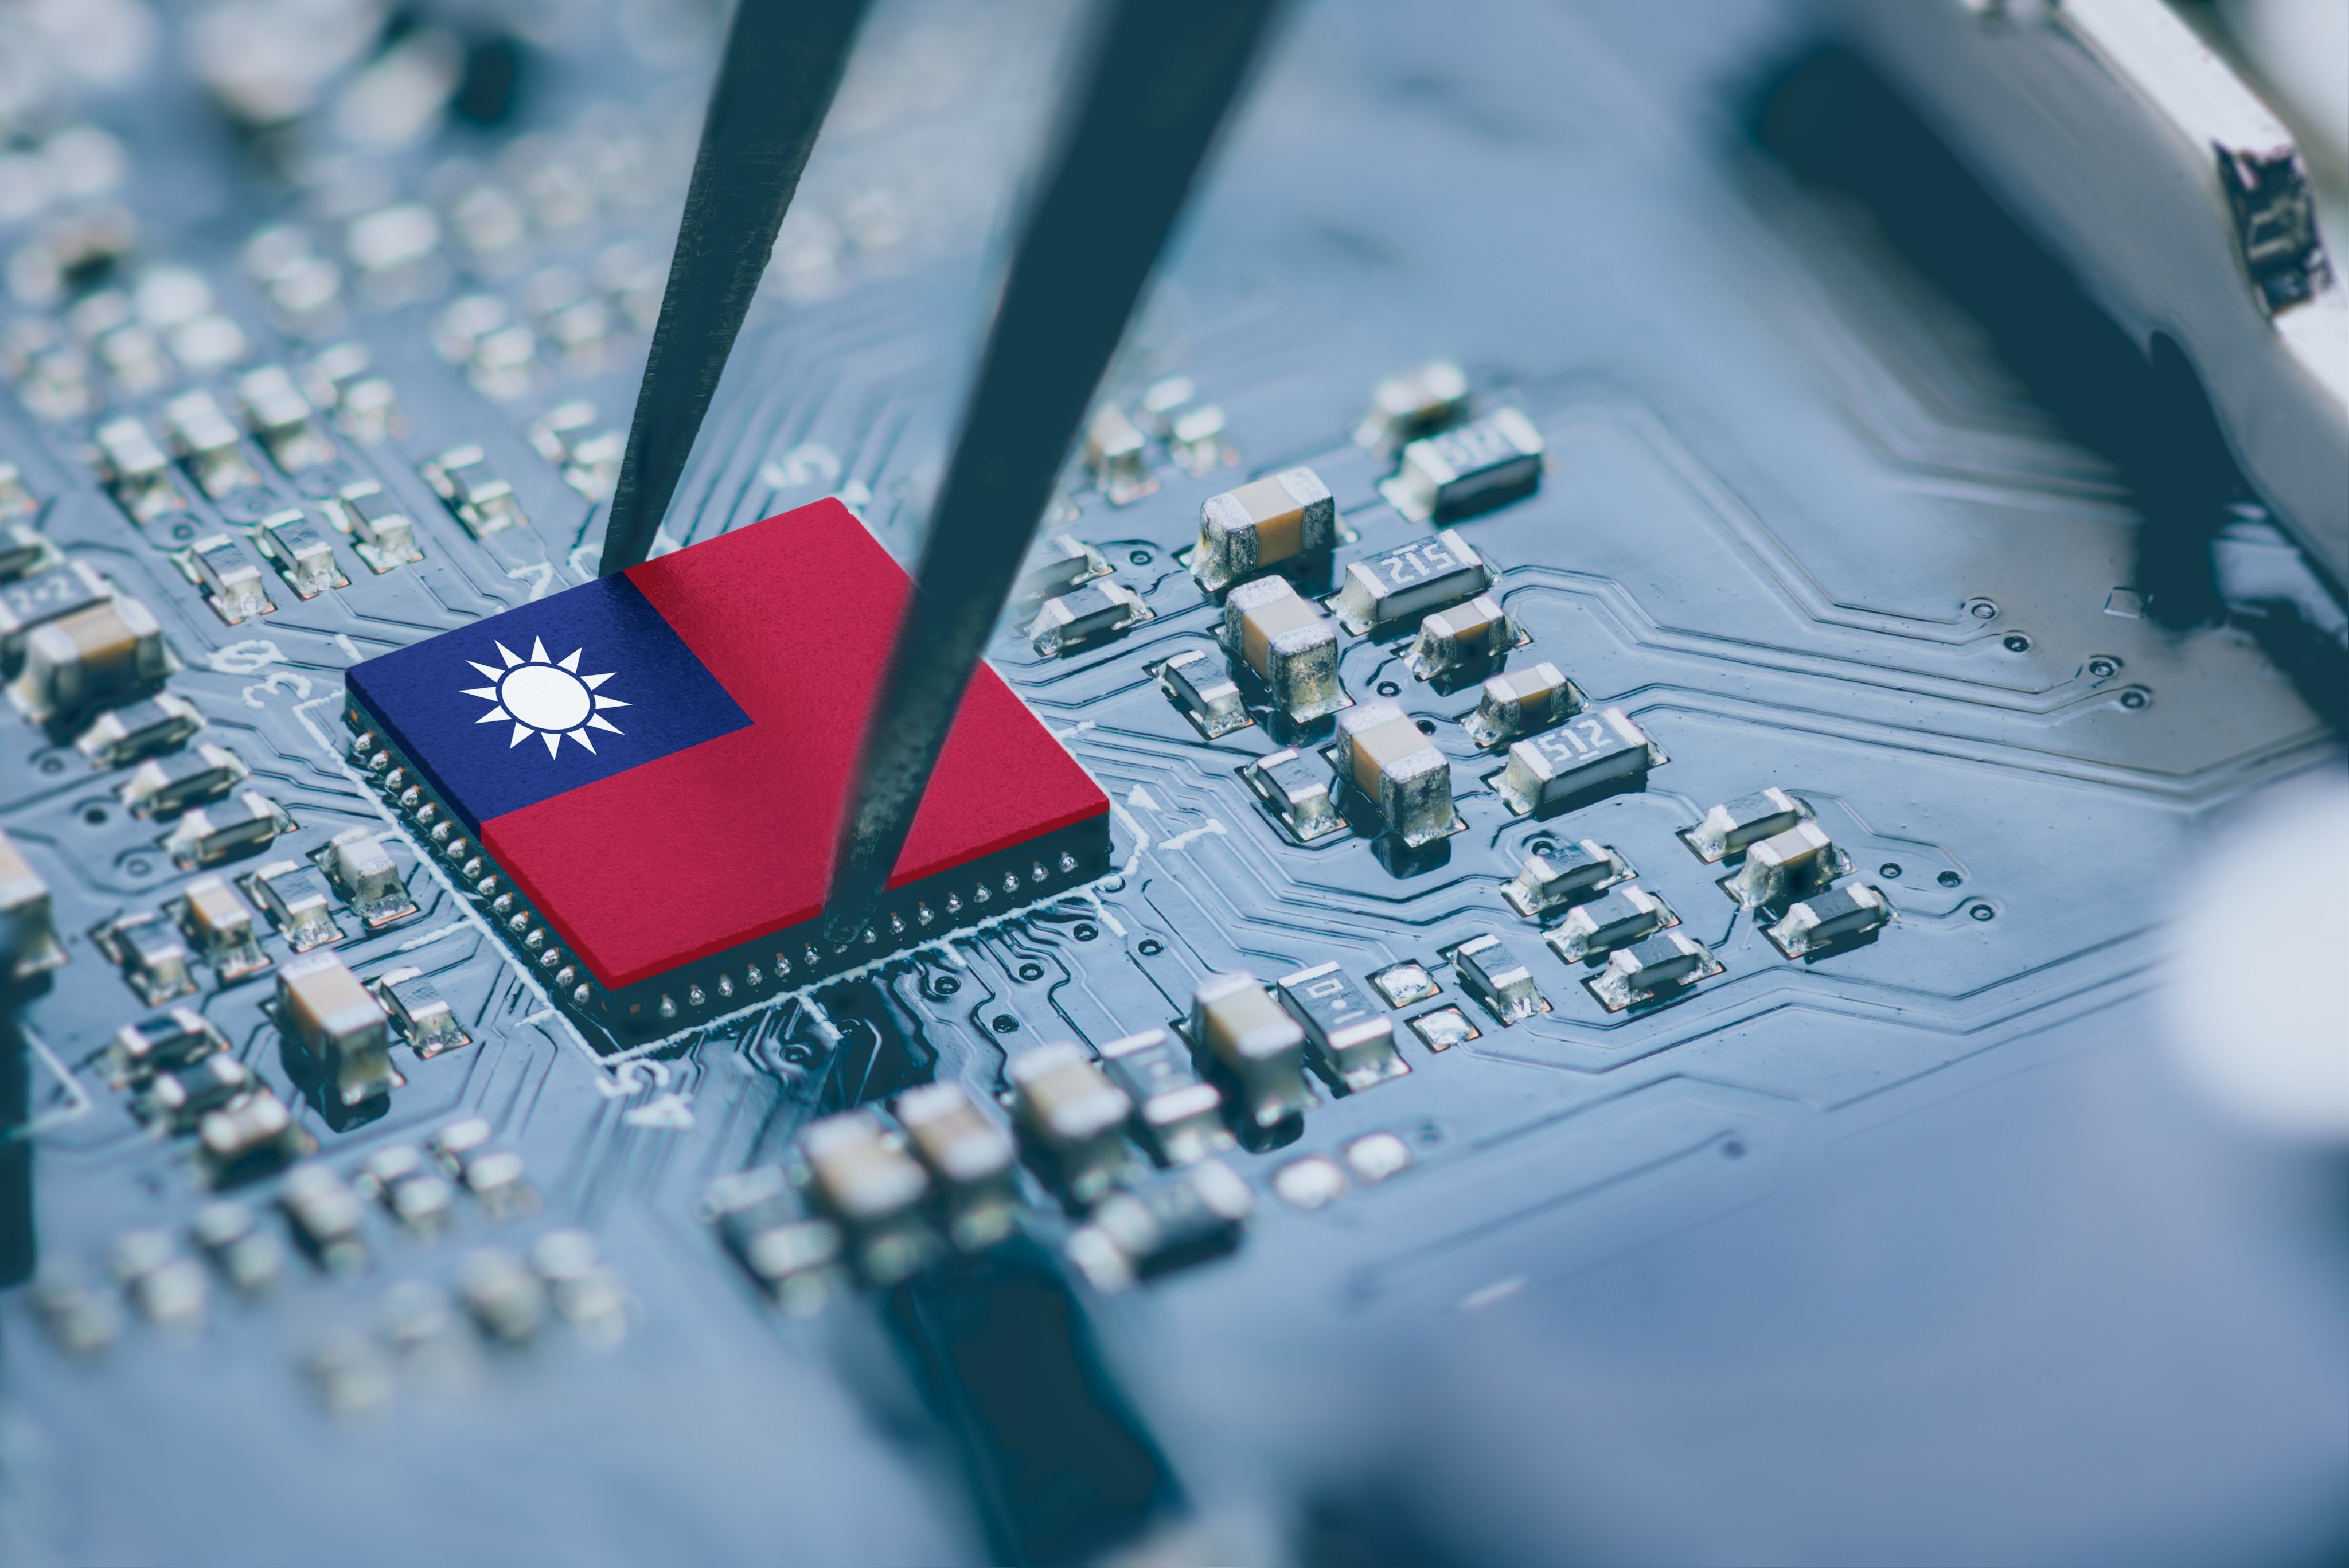 Taiwan is at the forefront of providing the world with critical gear for AI-related devices. Photo: Shutterstock